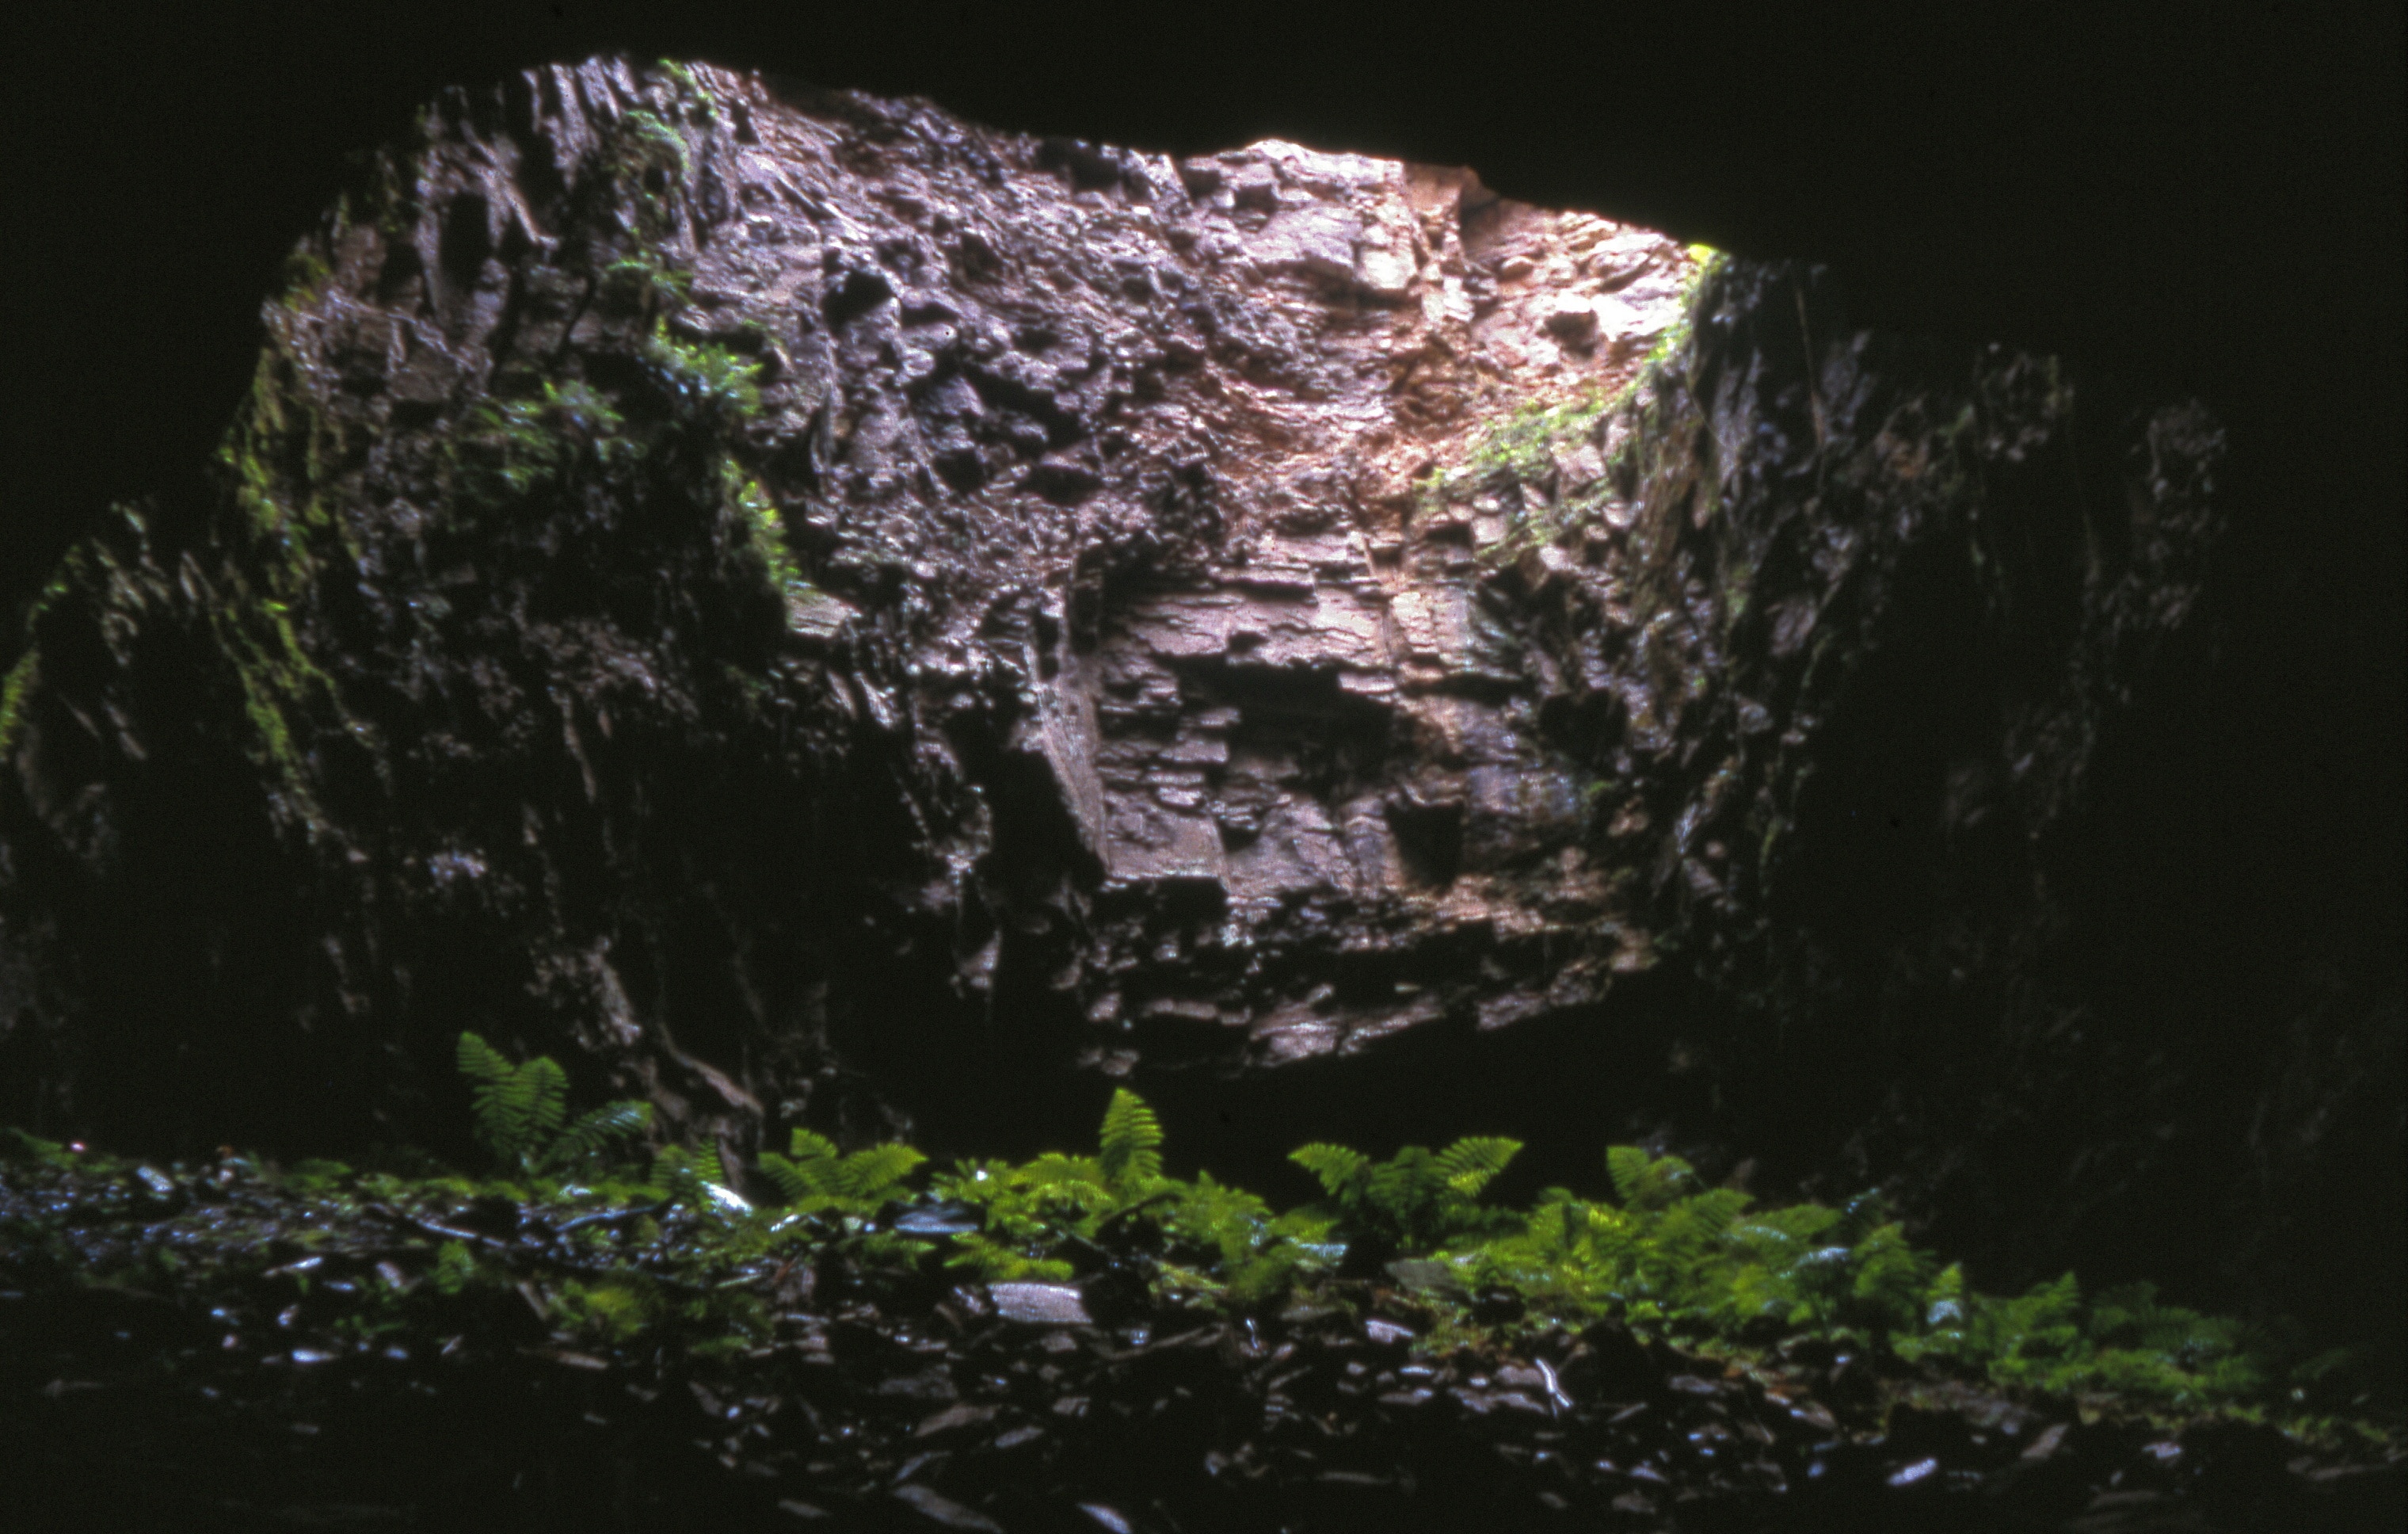 Greenery at the bottom of a dark, cave-like geographical feature with a large opening at the top.